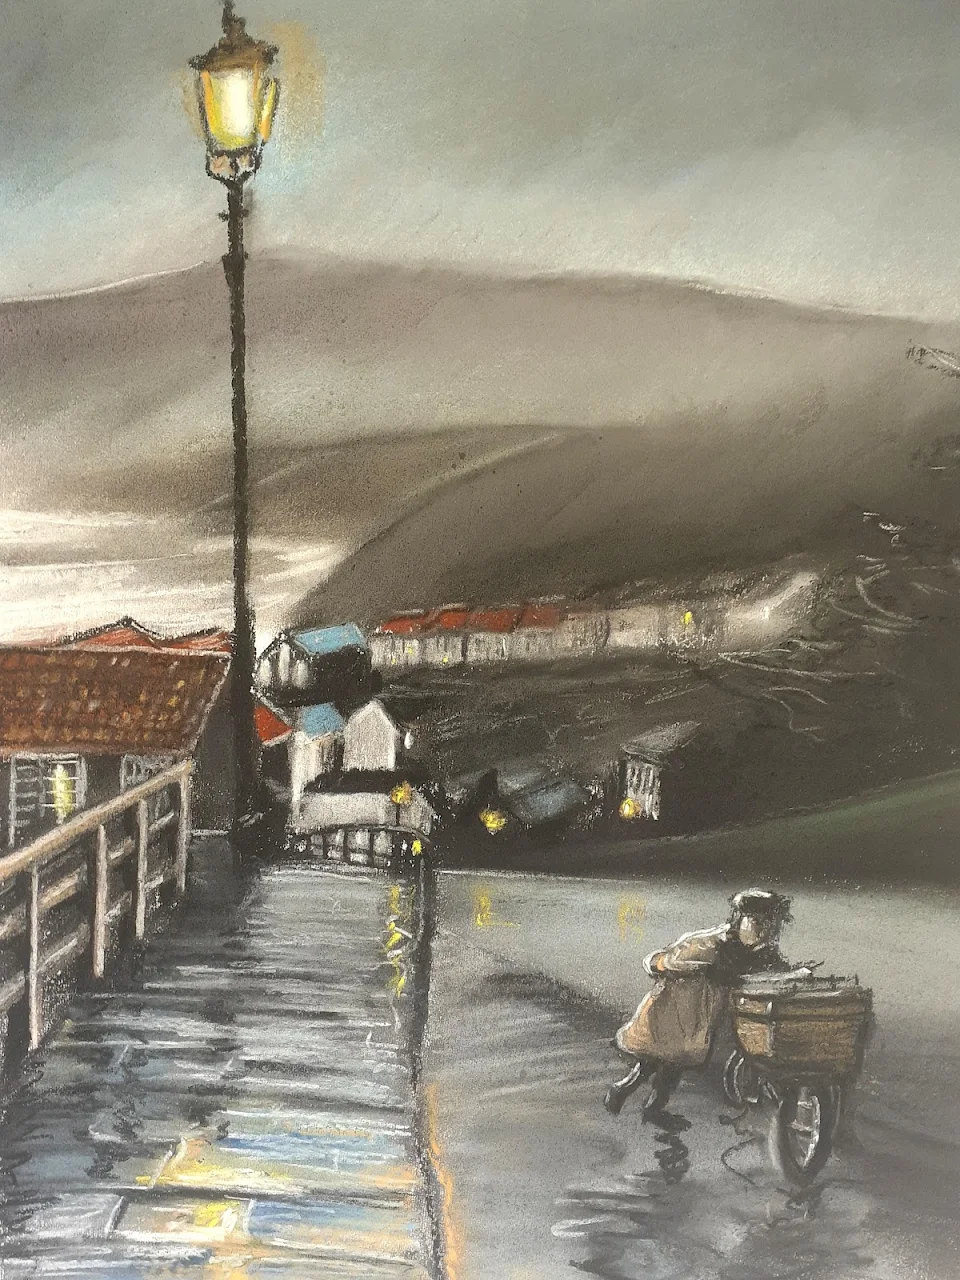 Robin hoods bay deliveries, charcoal and pastel art by me.